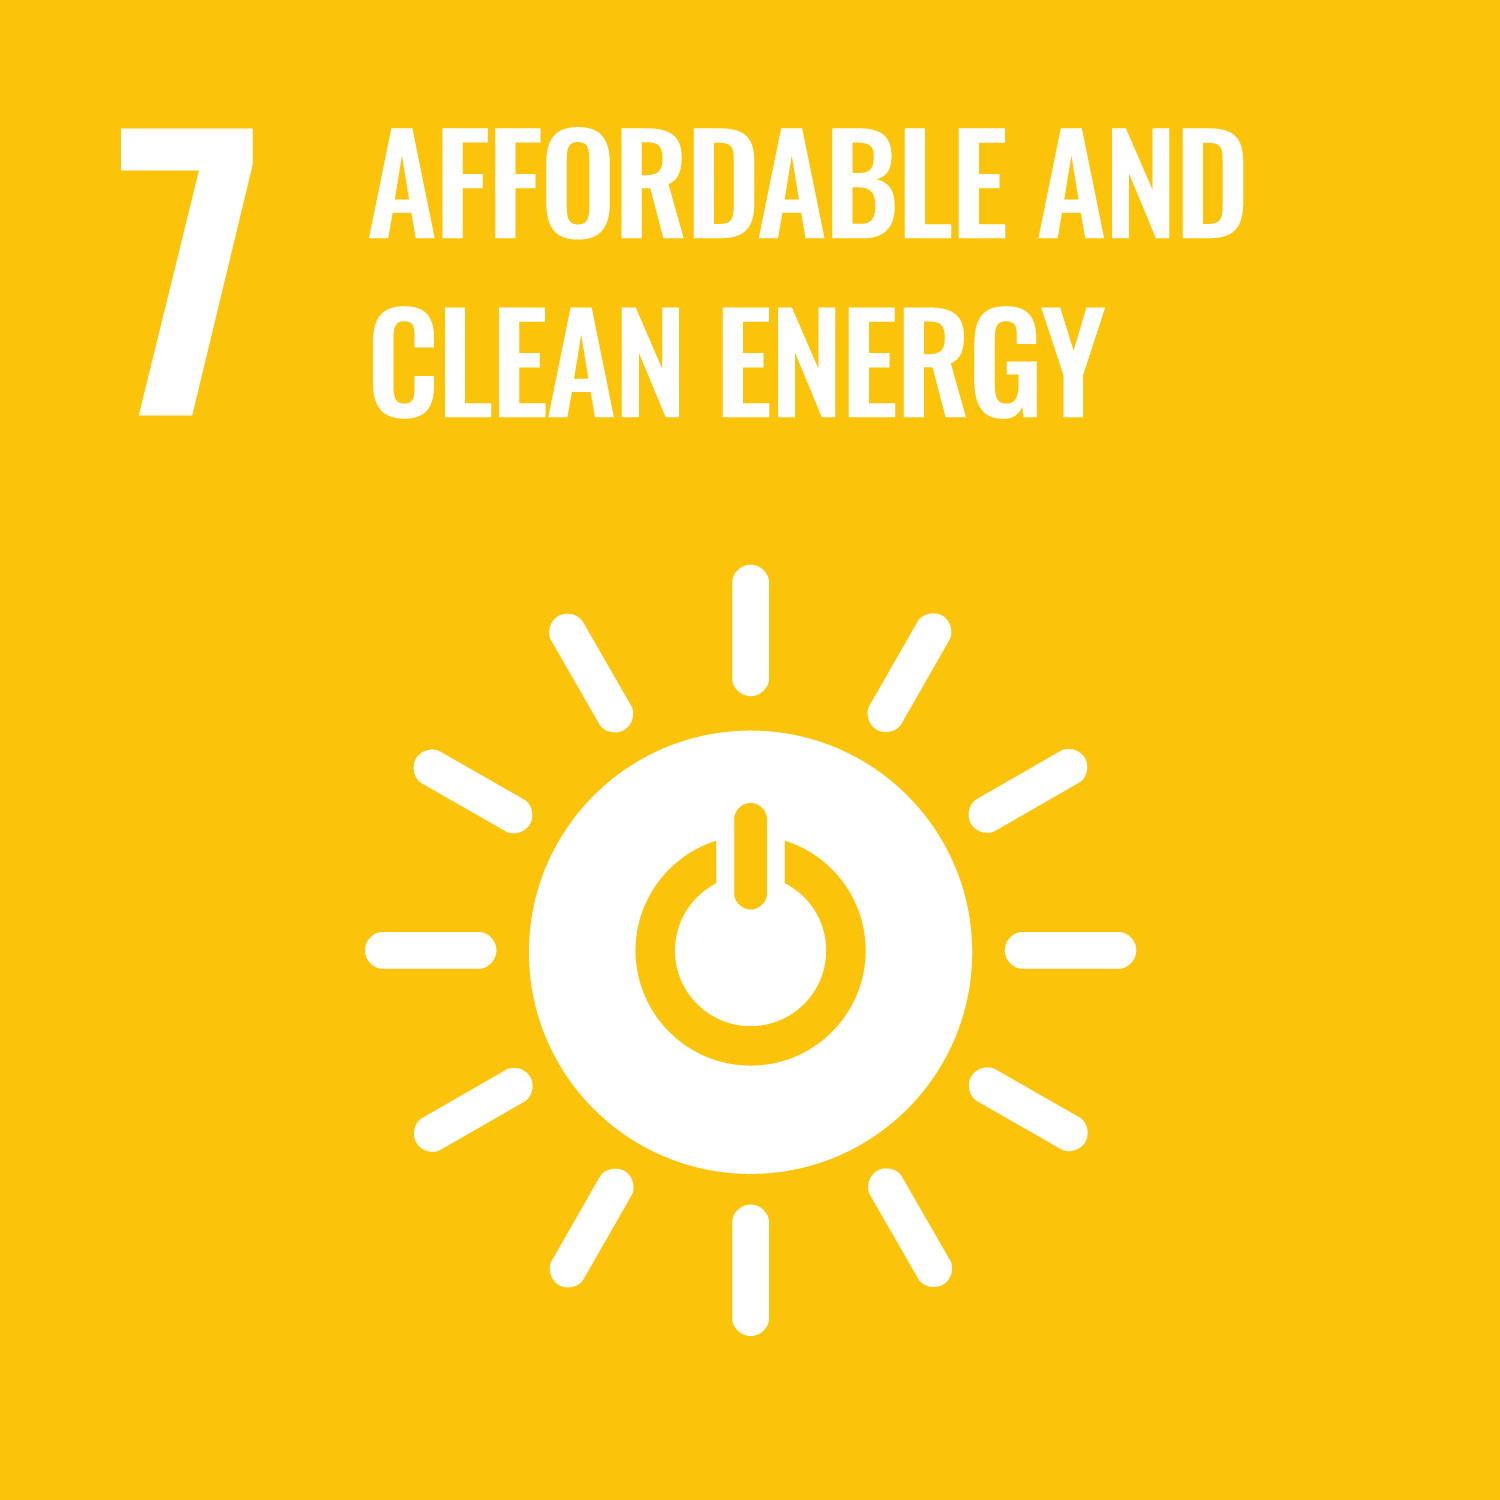 SDGs 可負擔的潔淨能源-Affordable and Clean Energy圖示